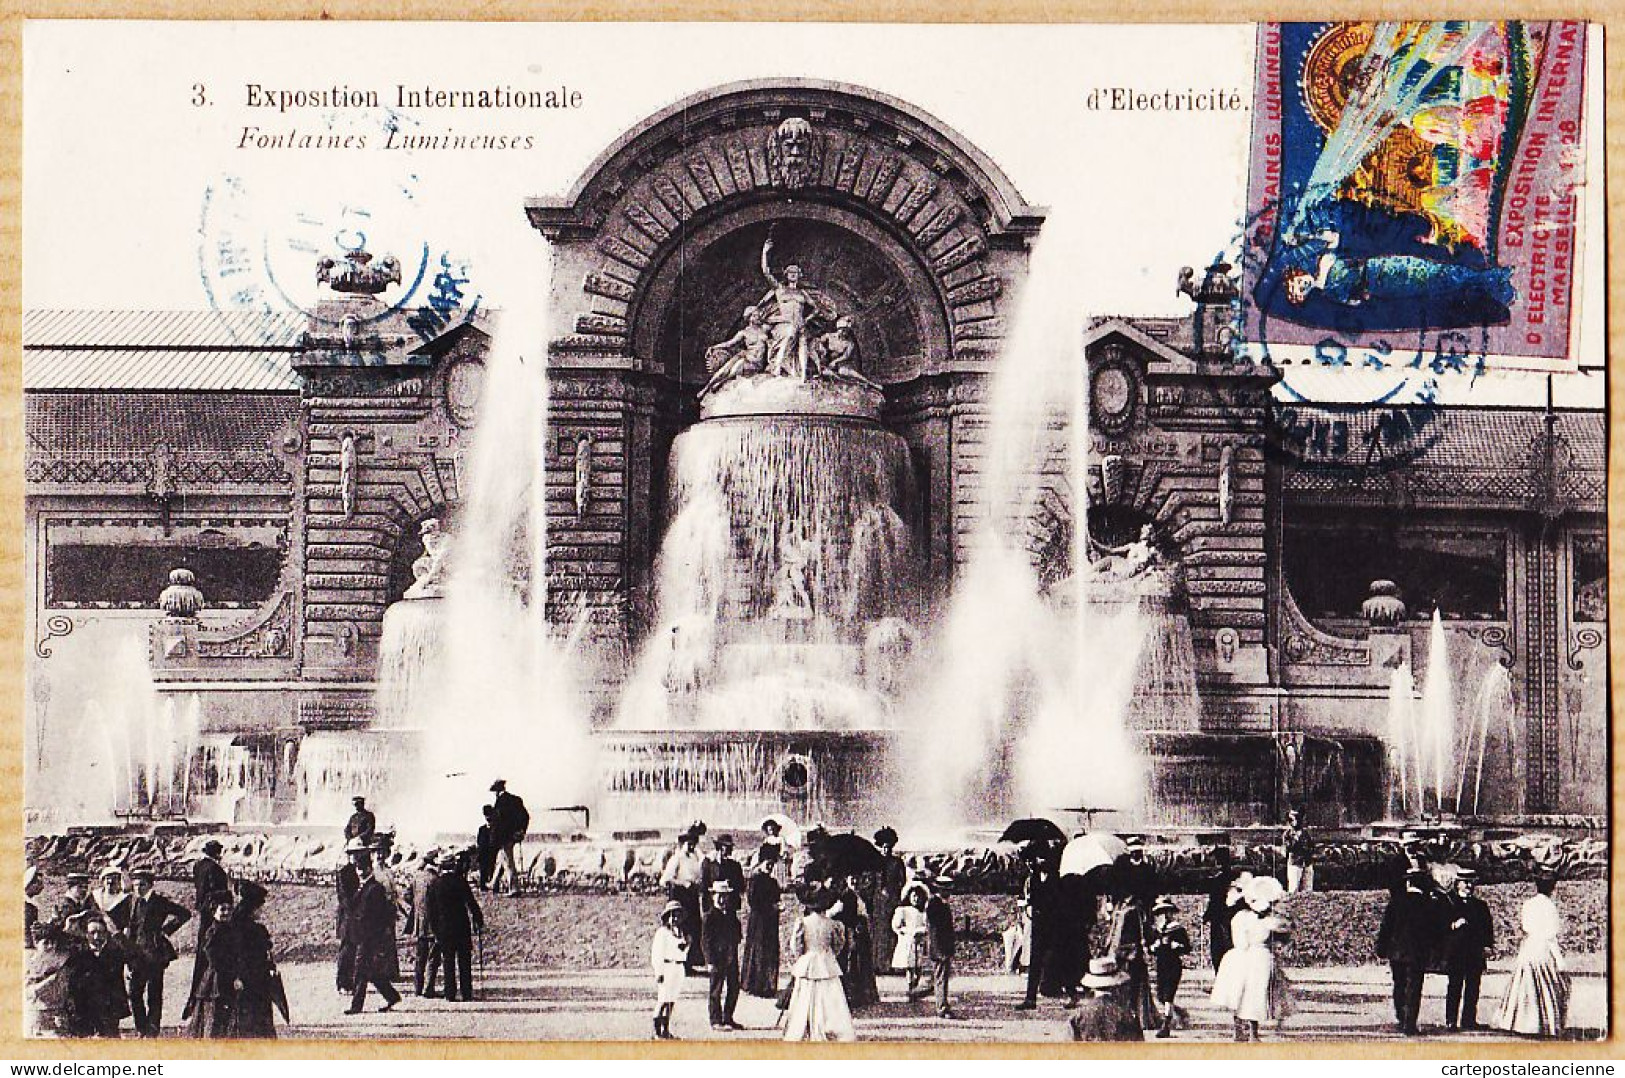 35032 / MARSEILLE Fontaines Lumineuses Exposition Internationale Electricité 1908 Vignette Expo-Photo BAUDOUIN-VINCENT  - Electrical Trade Shows And Other